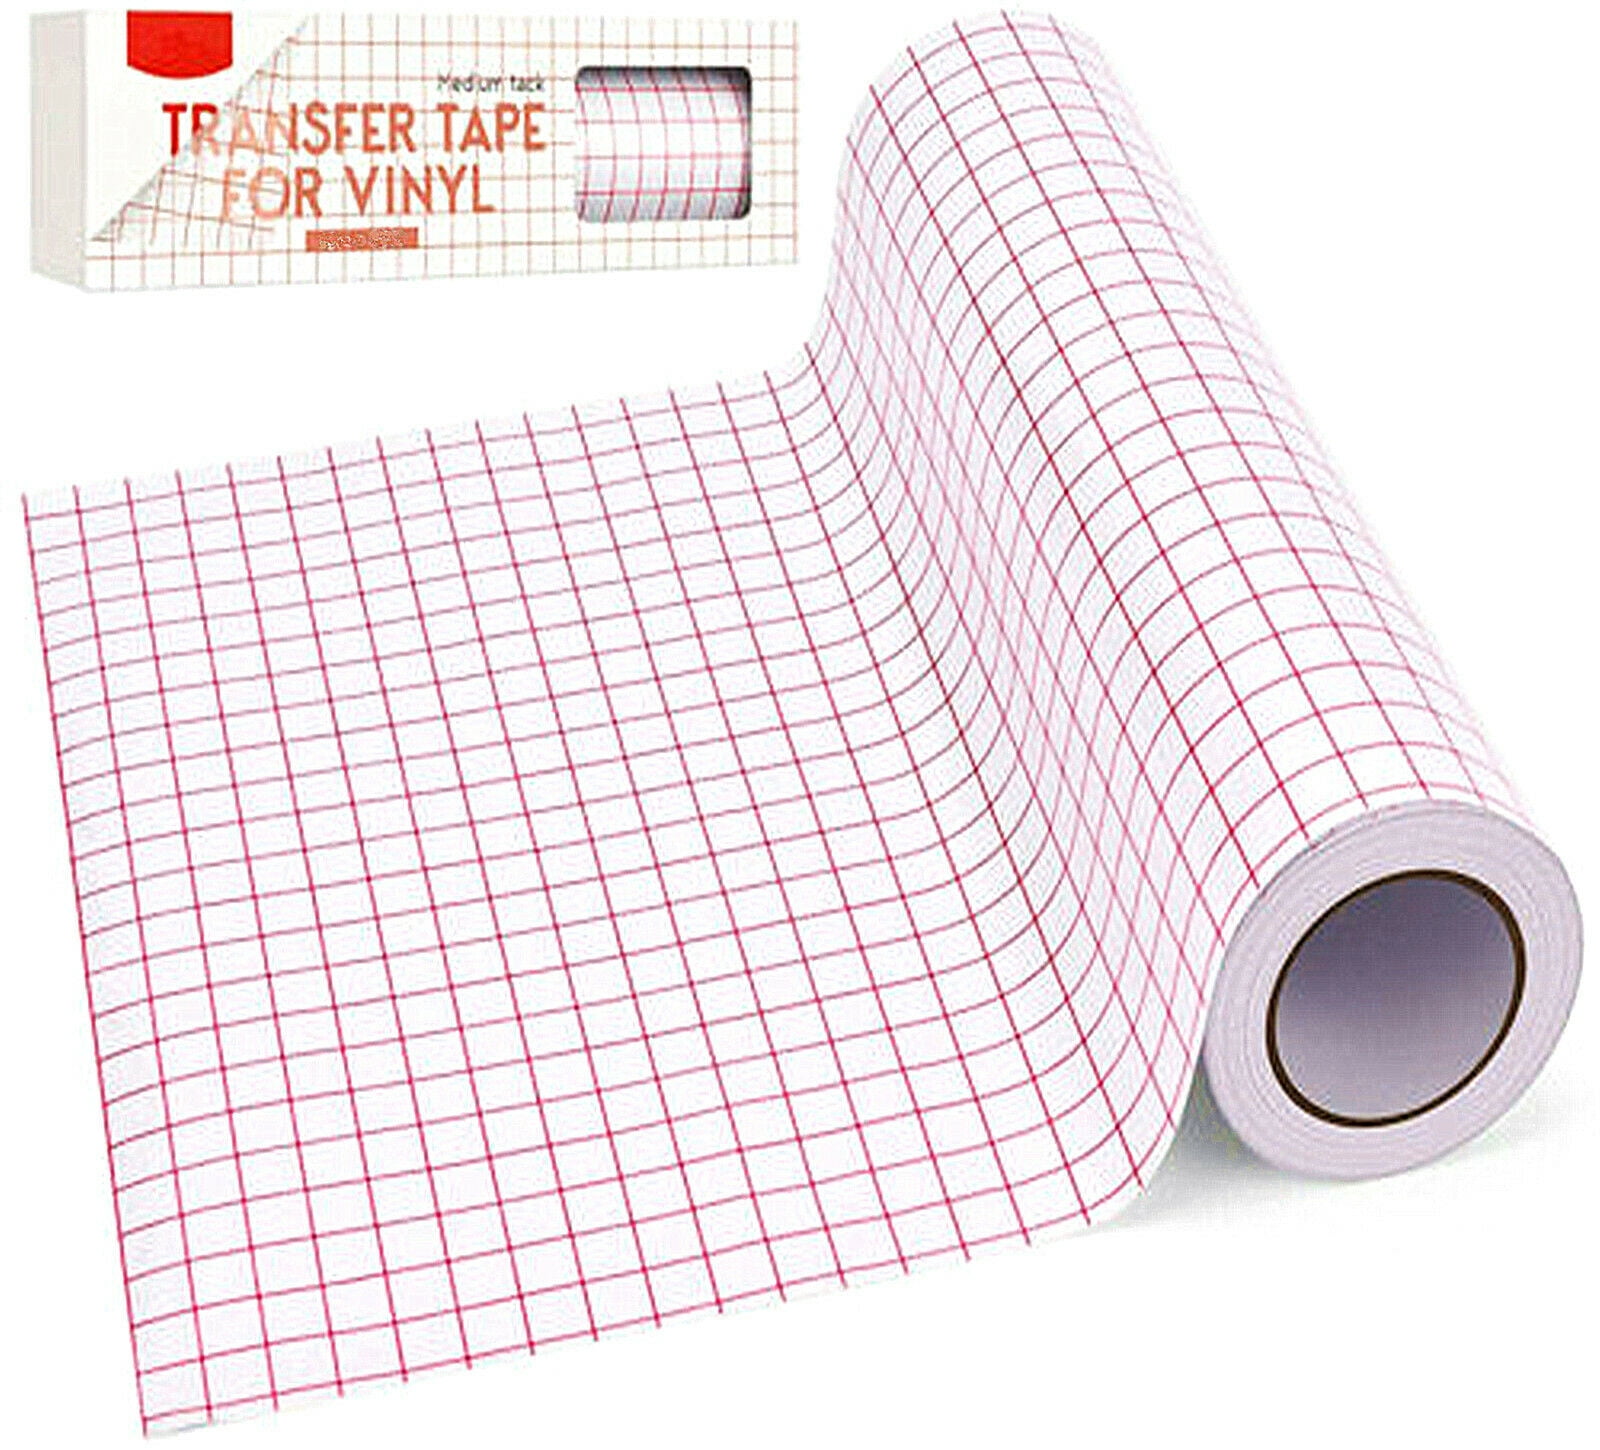 HTVRONT 12 x 80 Feet Transfer Tape for Vinyl with Red Alignment Grid  Transfer paper Perfect for Self Adhesive Vinyl for Signs Stickers Decals  Walls Doors & Windows 